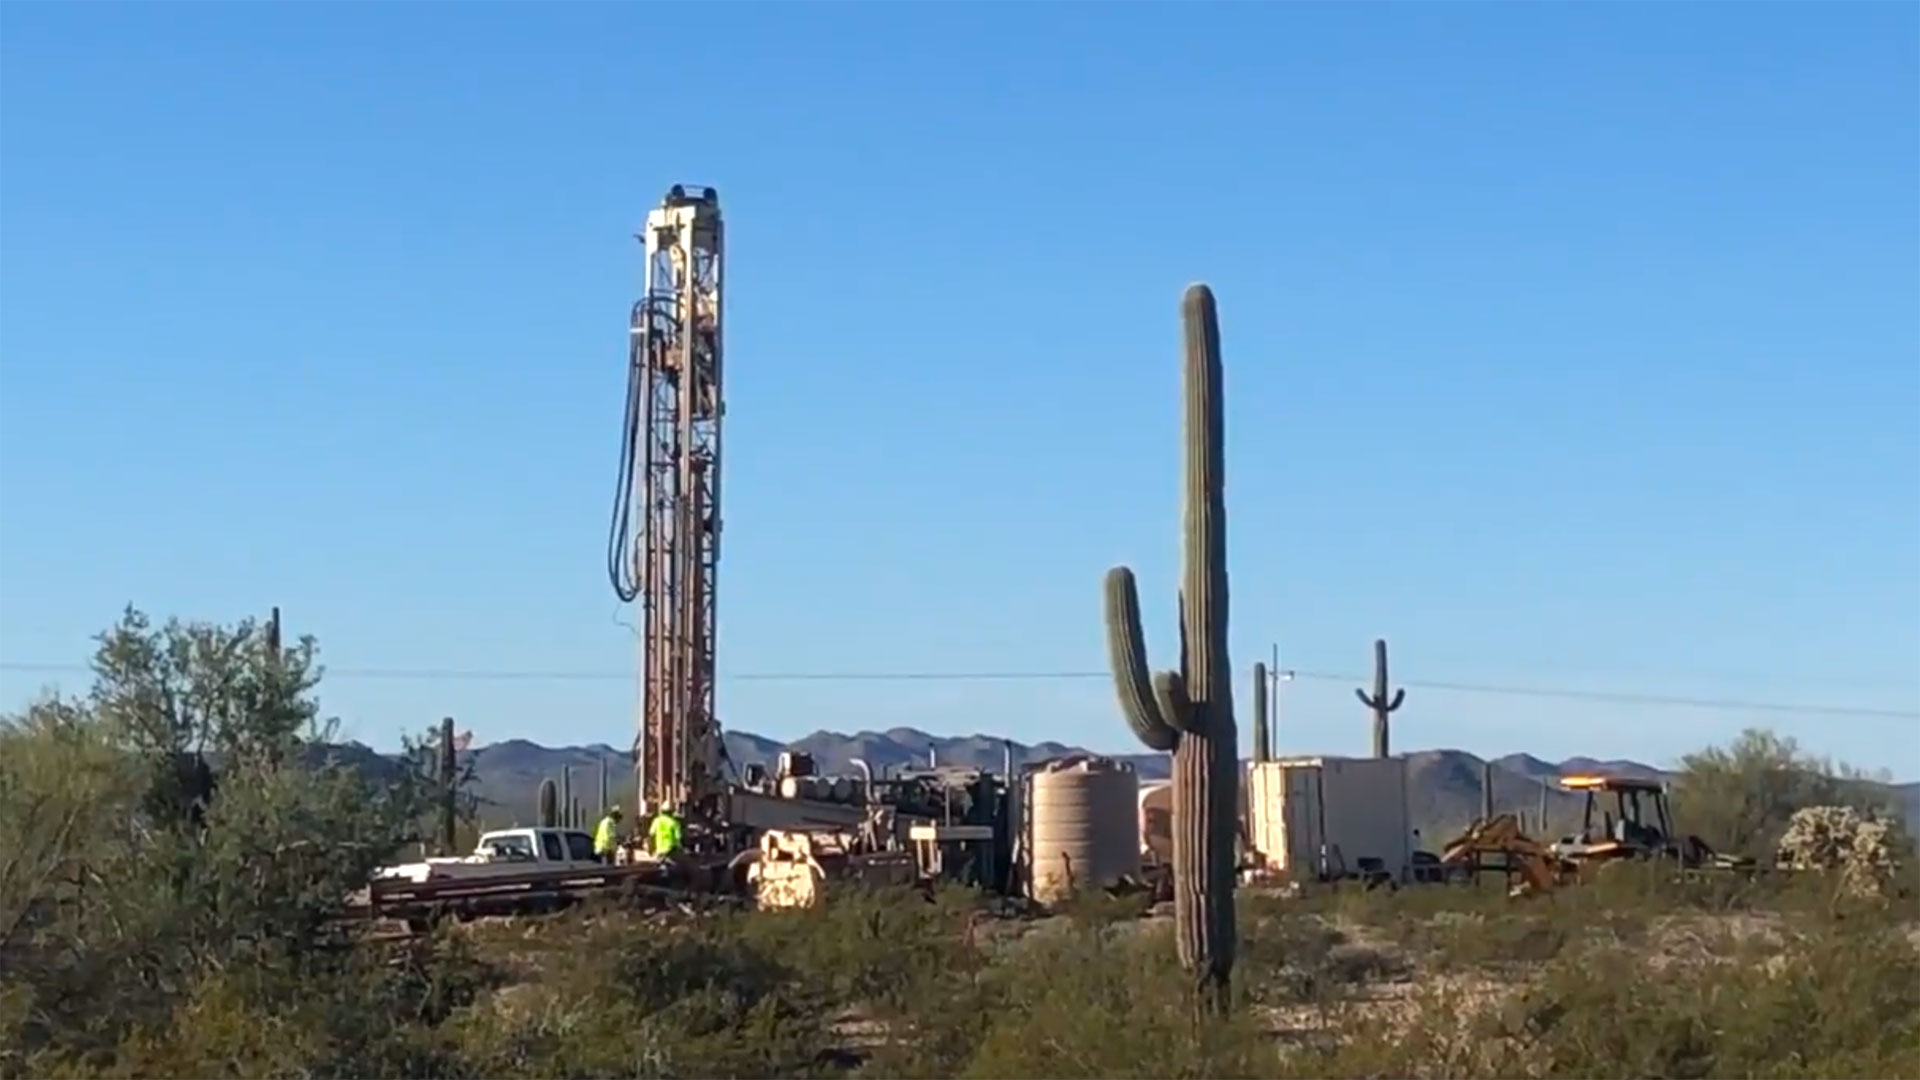 A video shot by wildlife biologist Rosemary Schiano of groundwater drilling near border wall construction close to Quitobaquito Springs on Dec. 16, 2019.